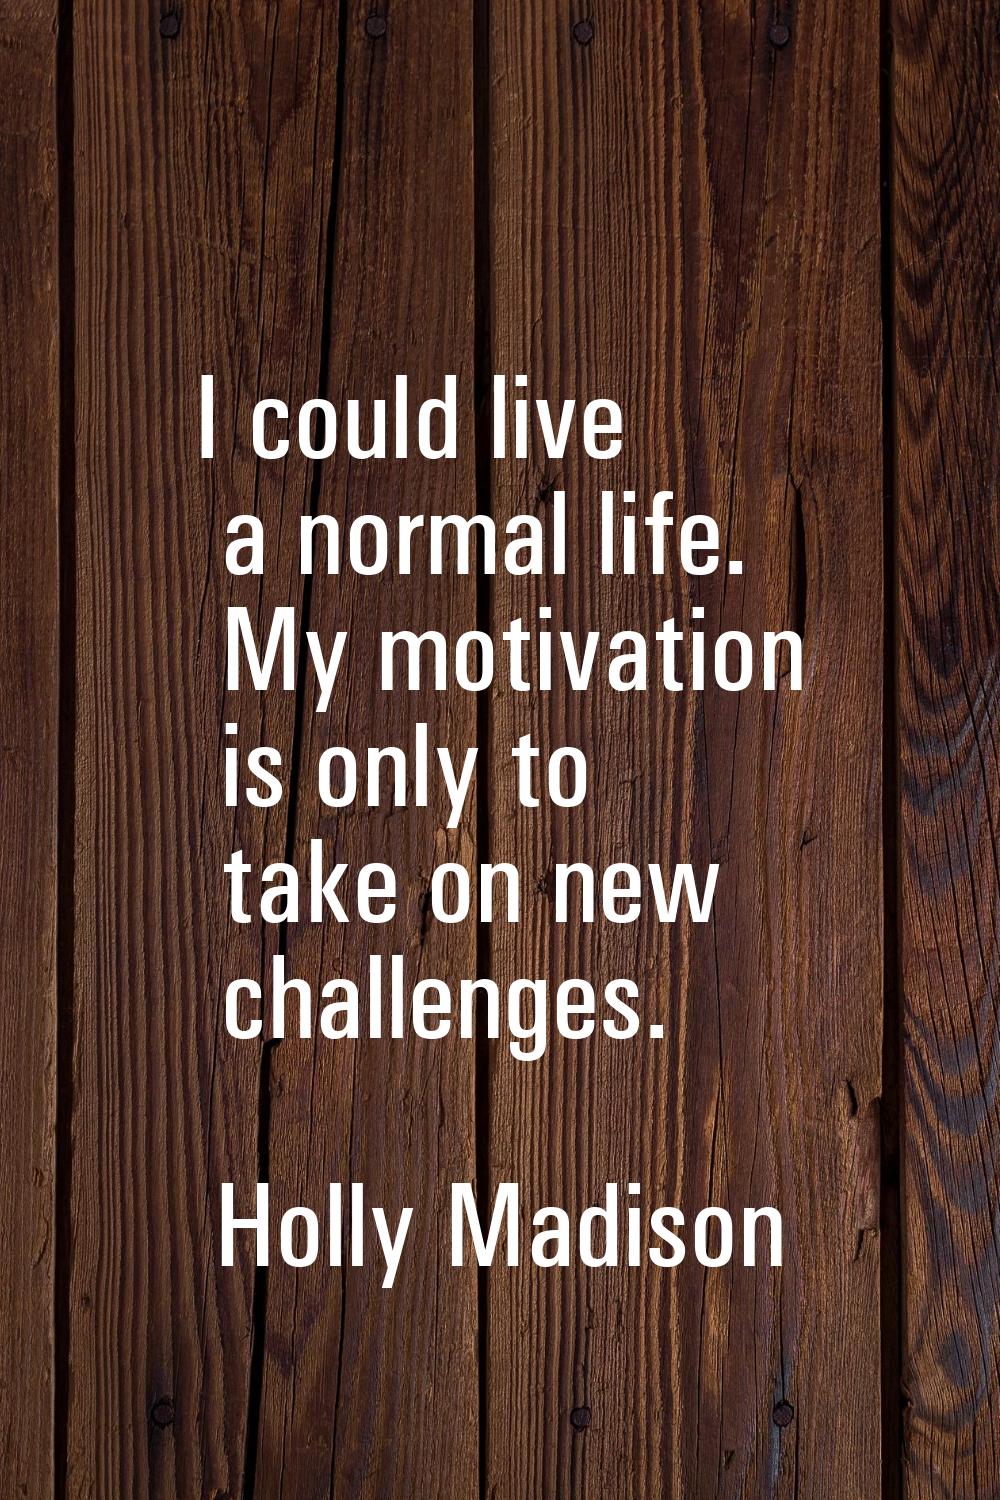 I could live a normal life. My motivation is only to take on new challenges.